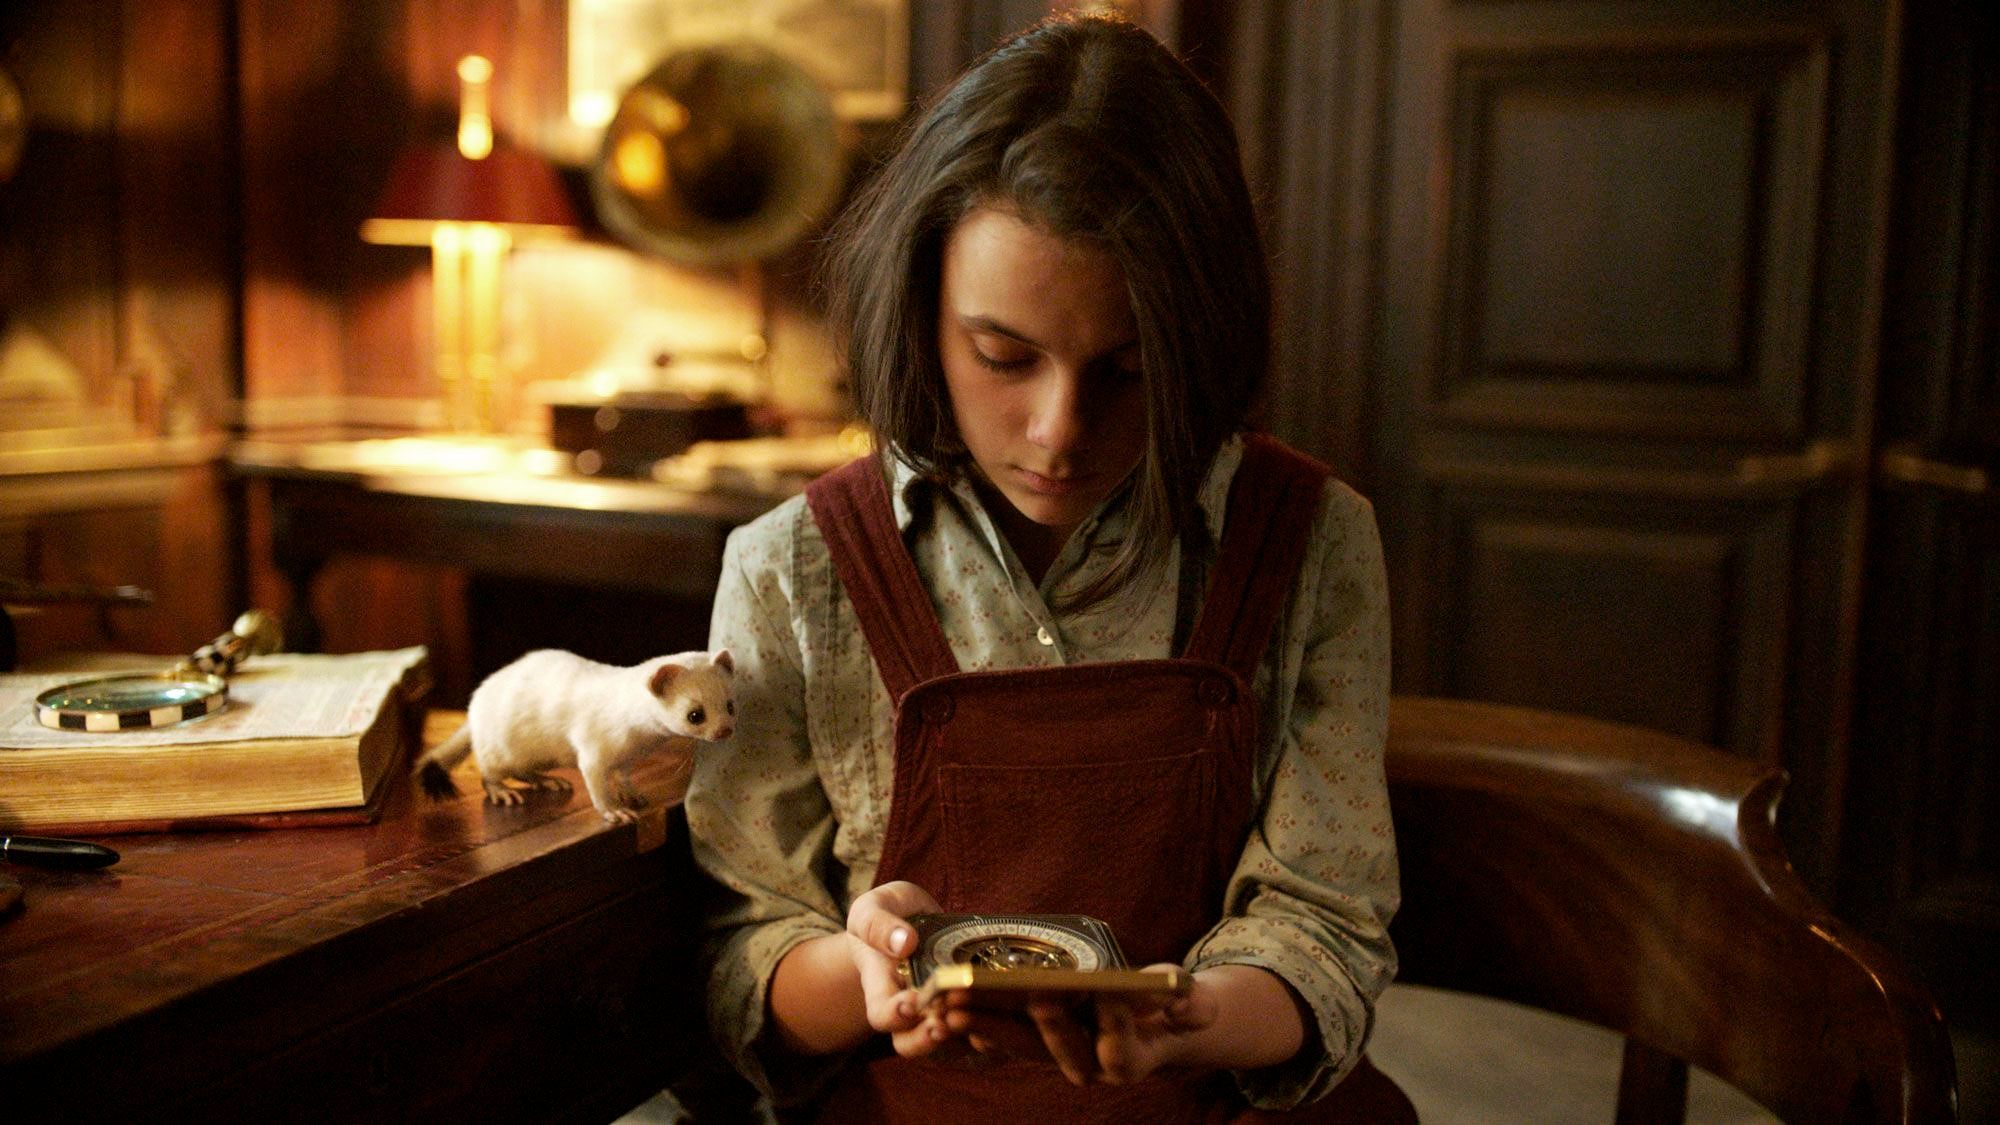 His Dark Materials Composer On Scoring The Show As A Fan Of The Books